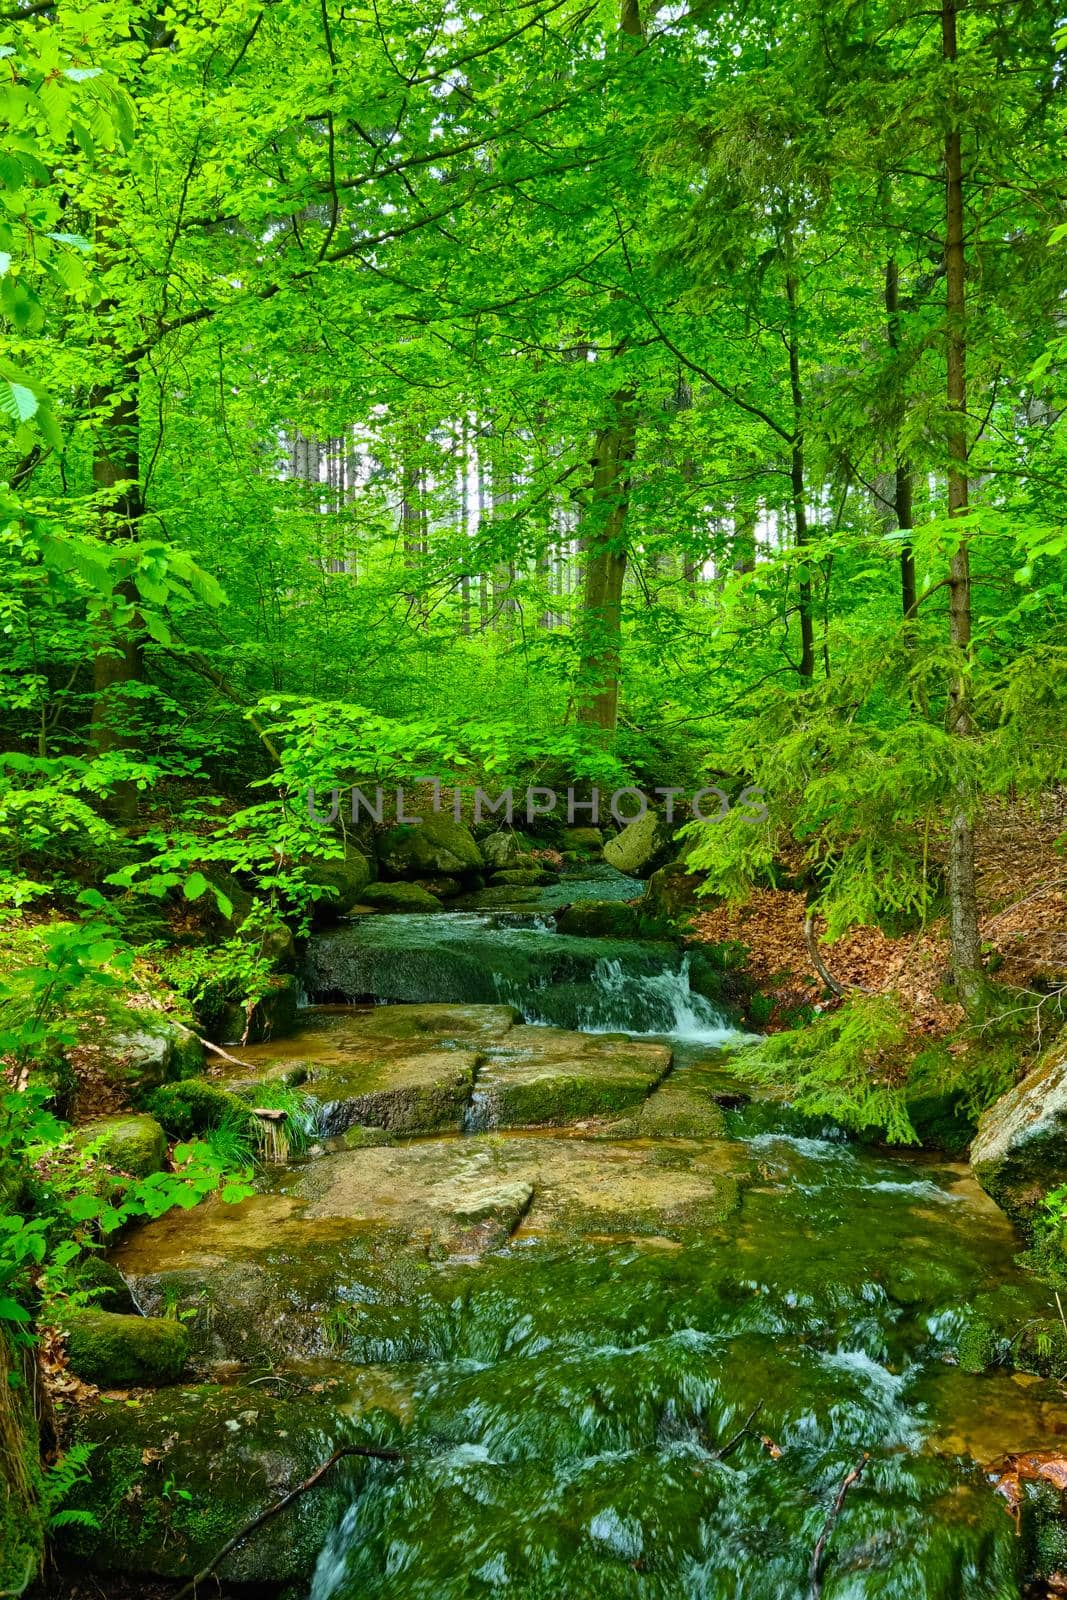 A picturesque view of the stream that flows through the stones in the green forest